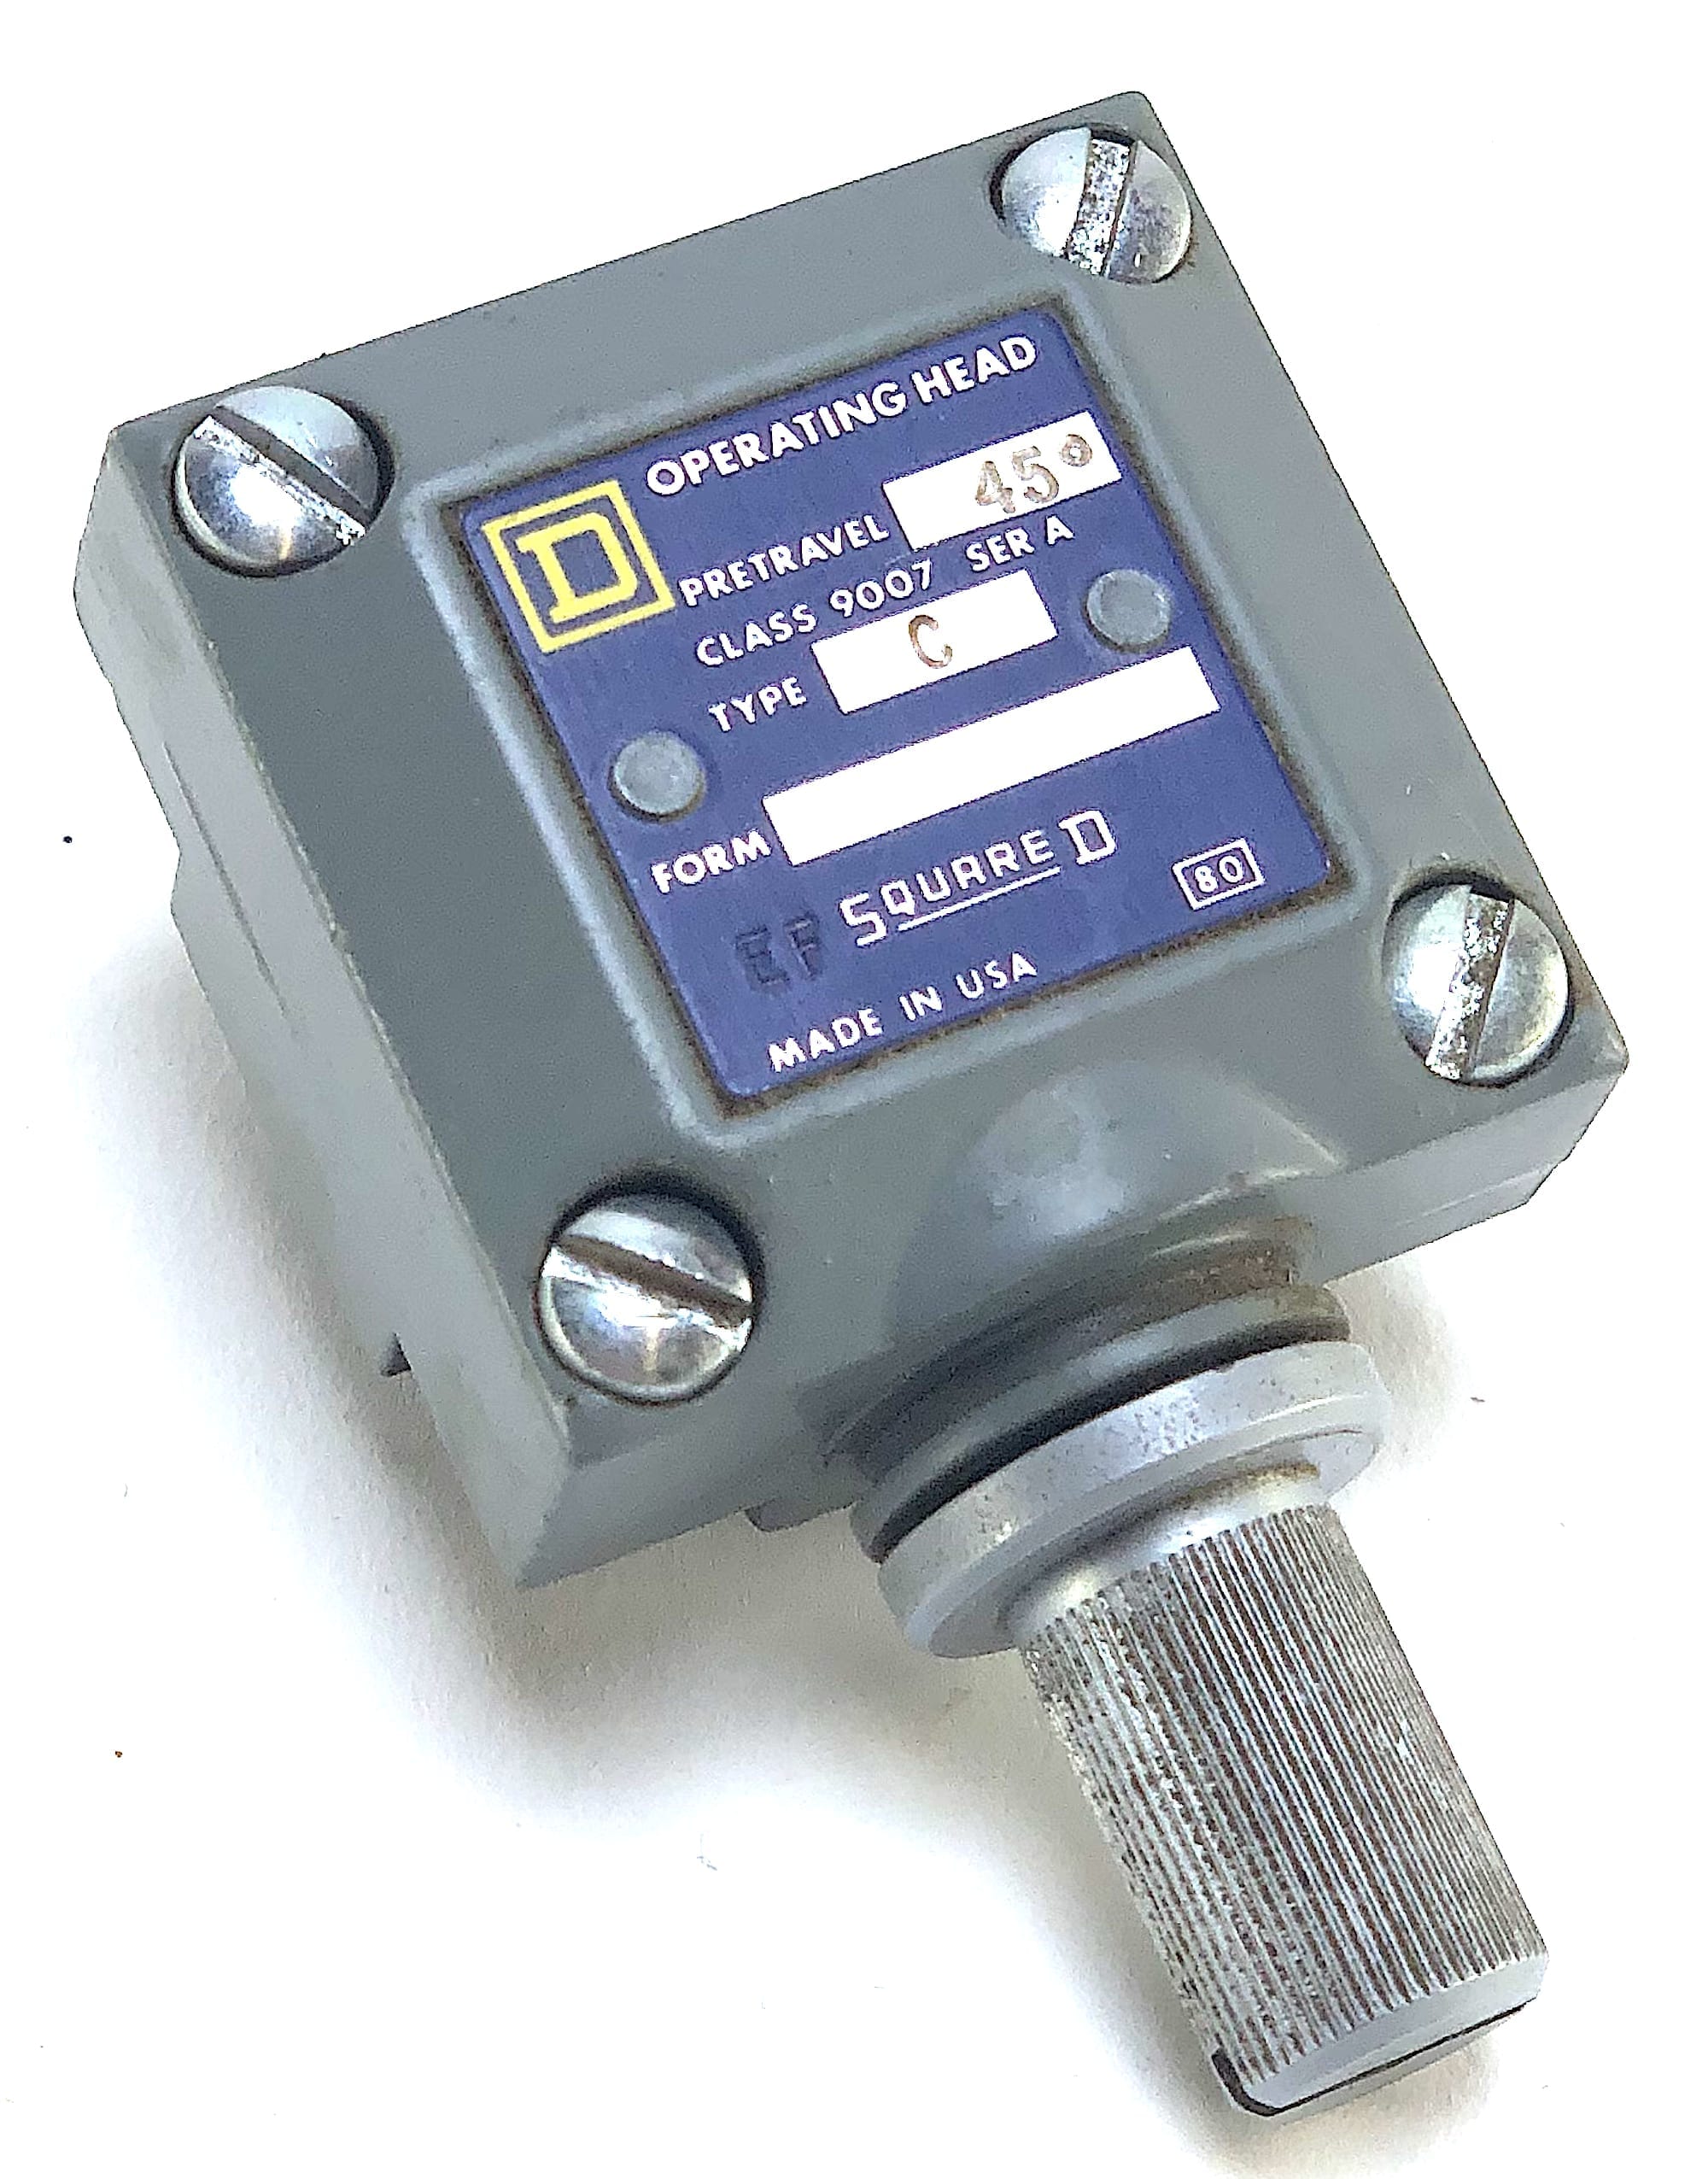 NEW SQUARE D 9007A LIMIT SWITCH HEAD 